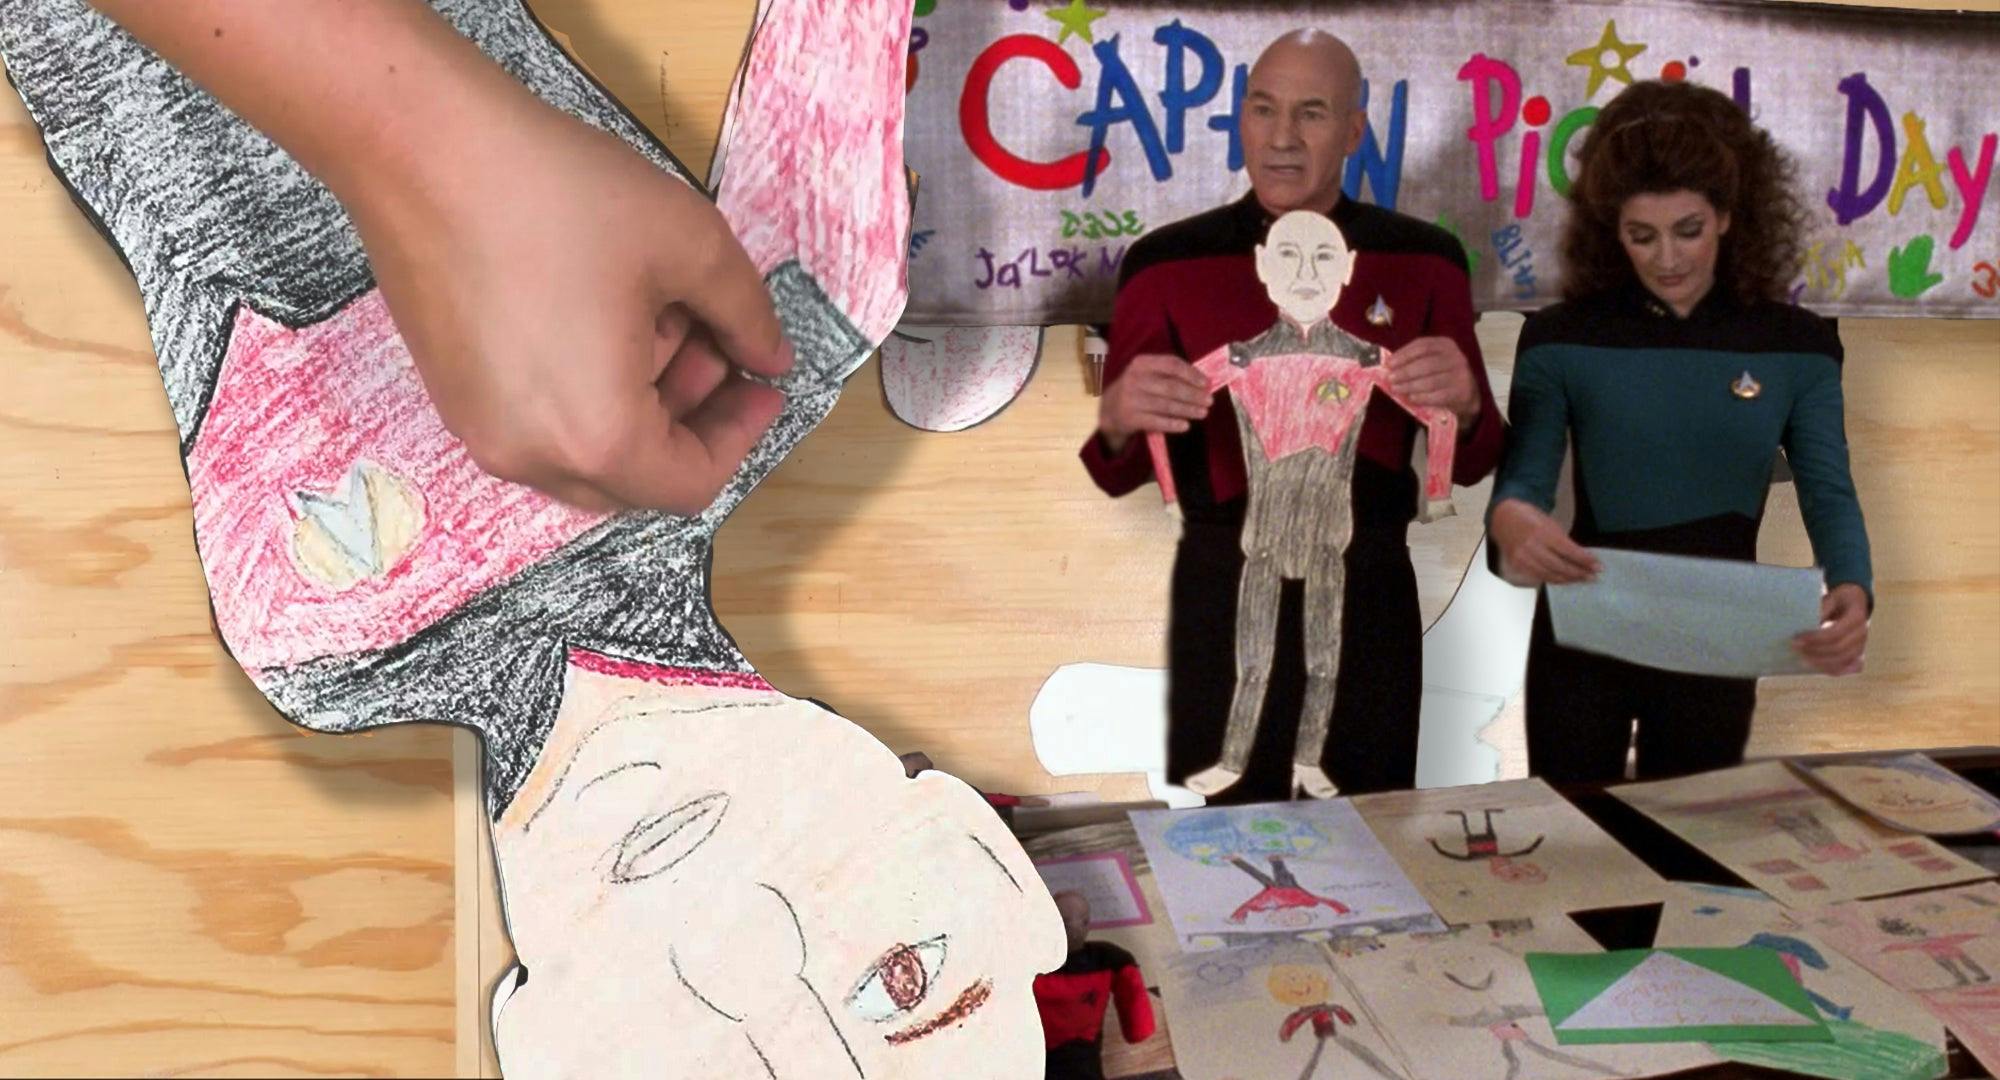 Picard paper craft